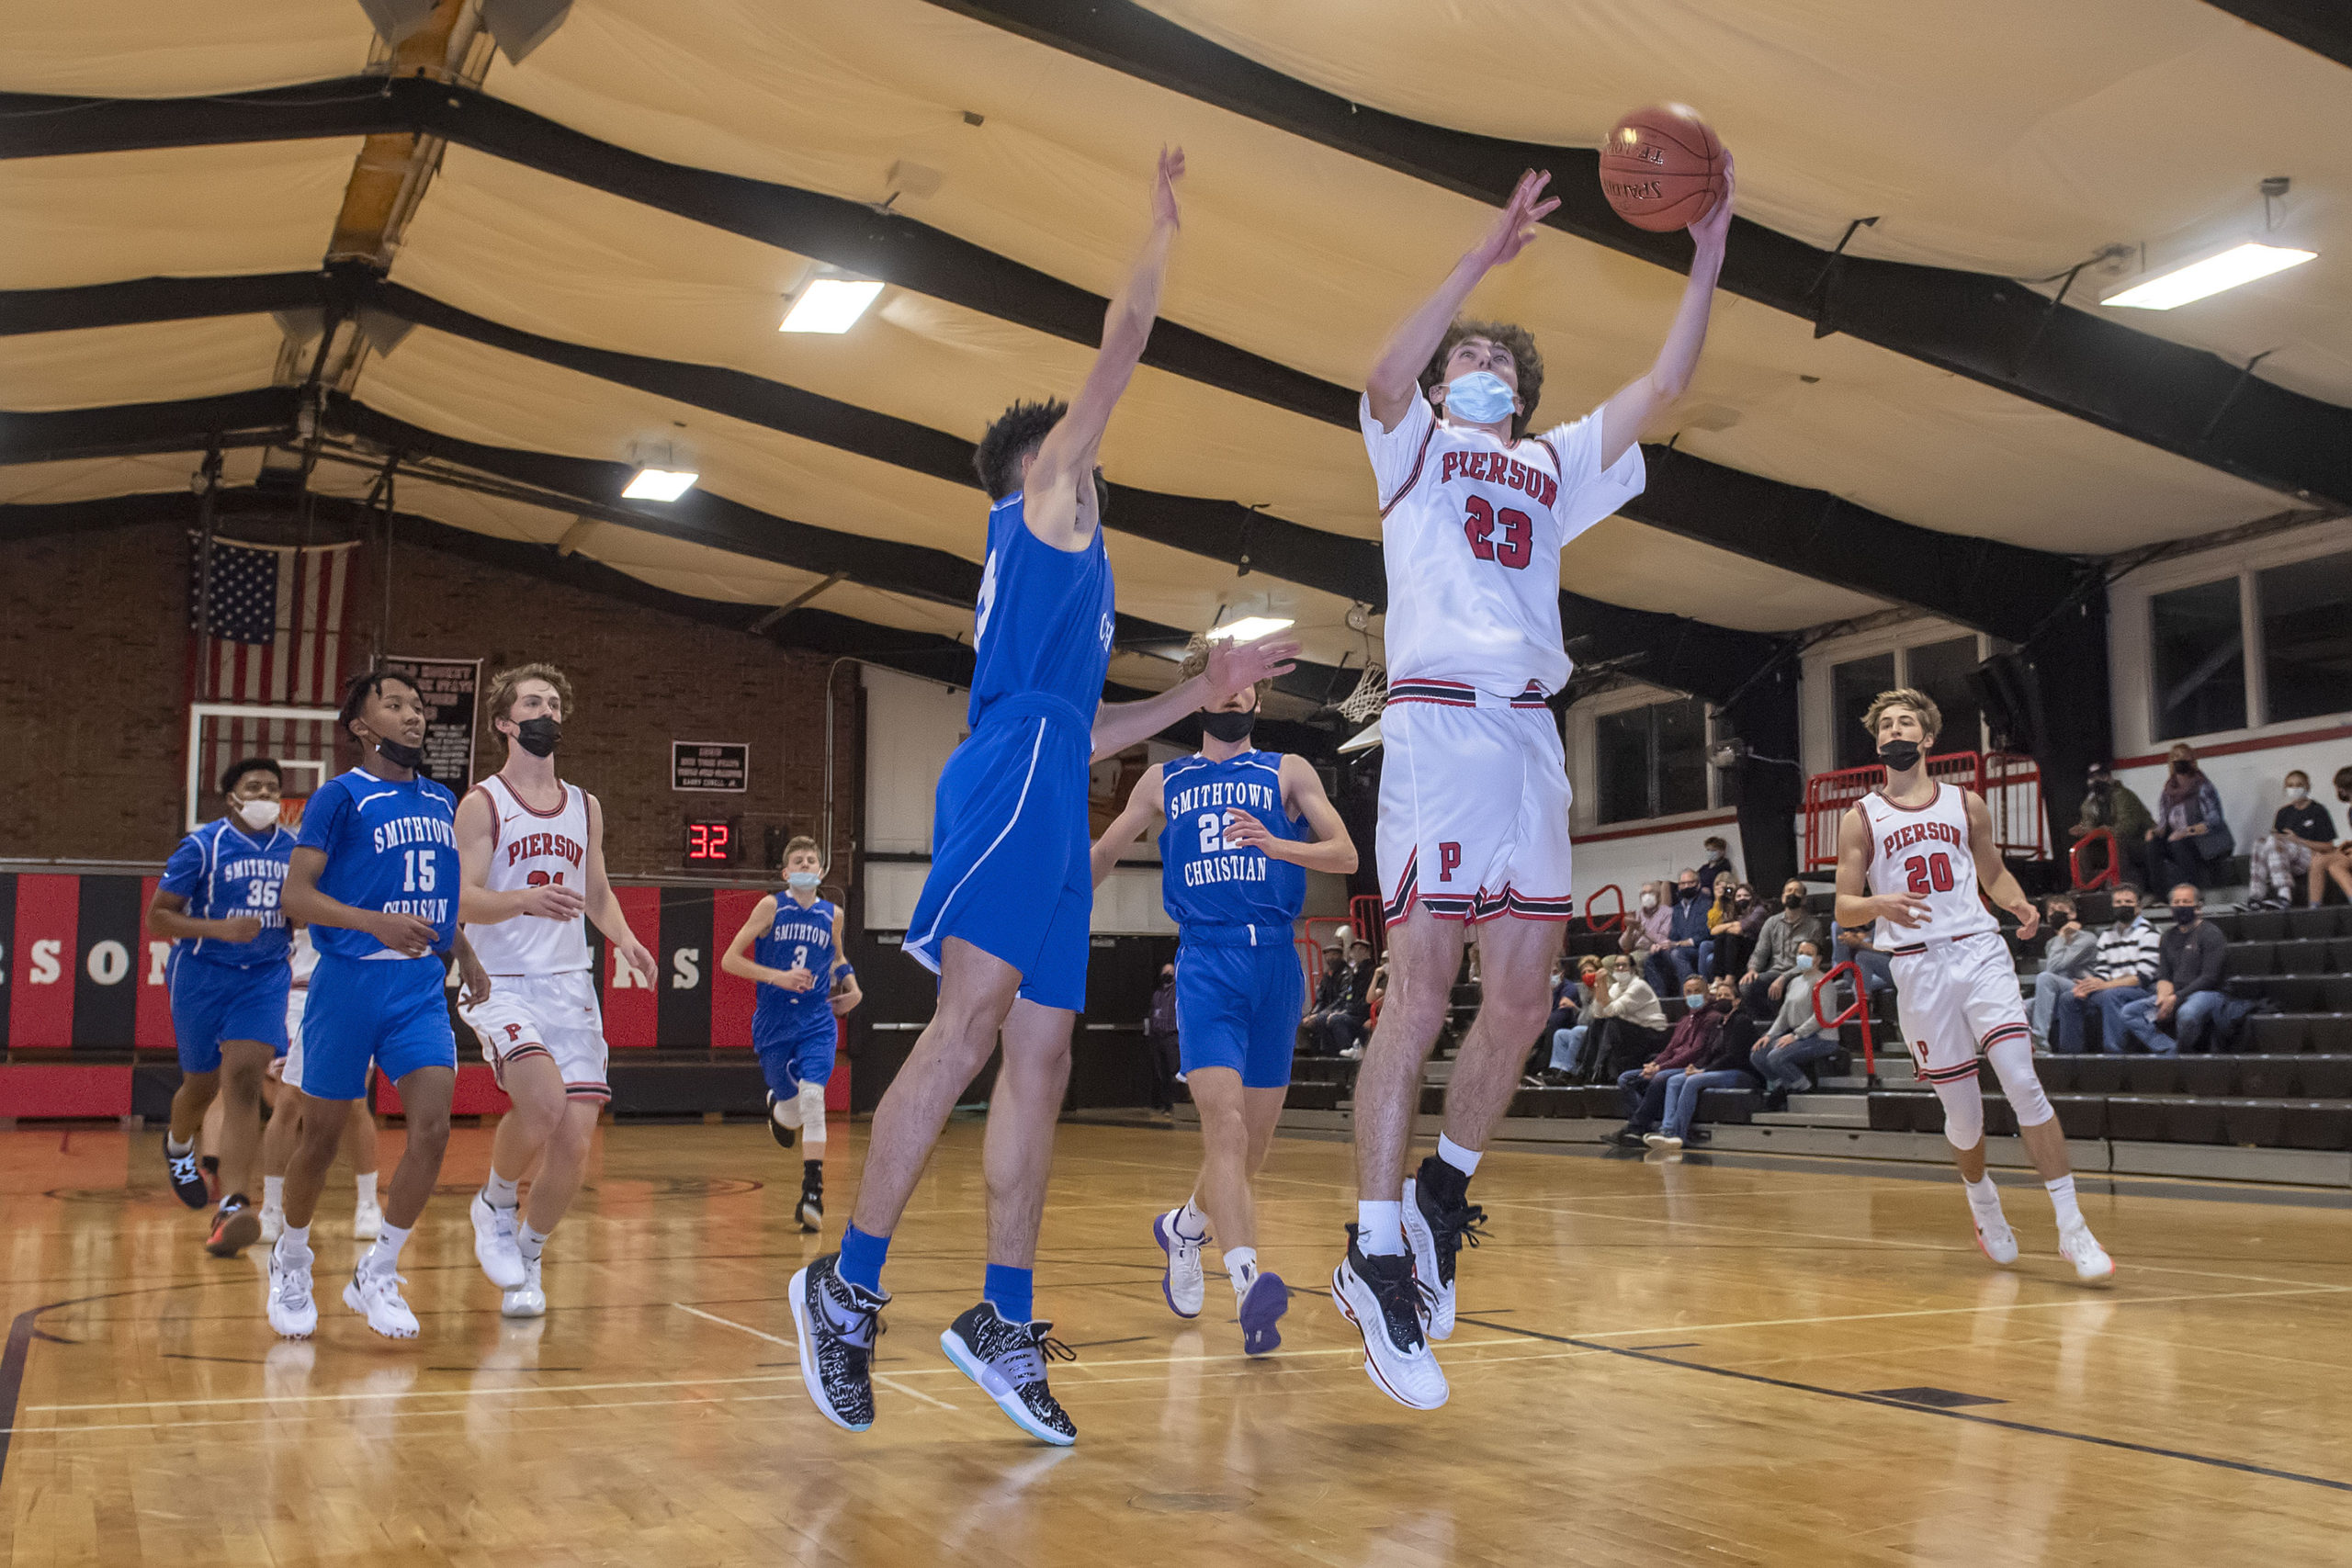 Charlie Culver driving to the basket in a game against Smithtown Christian earlier this season.